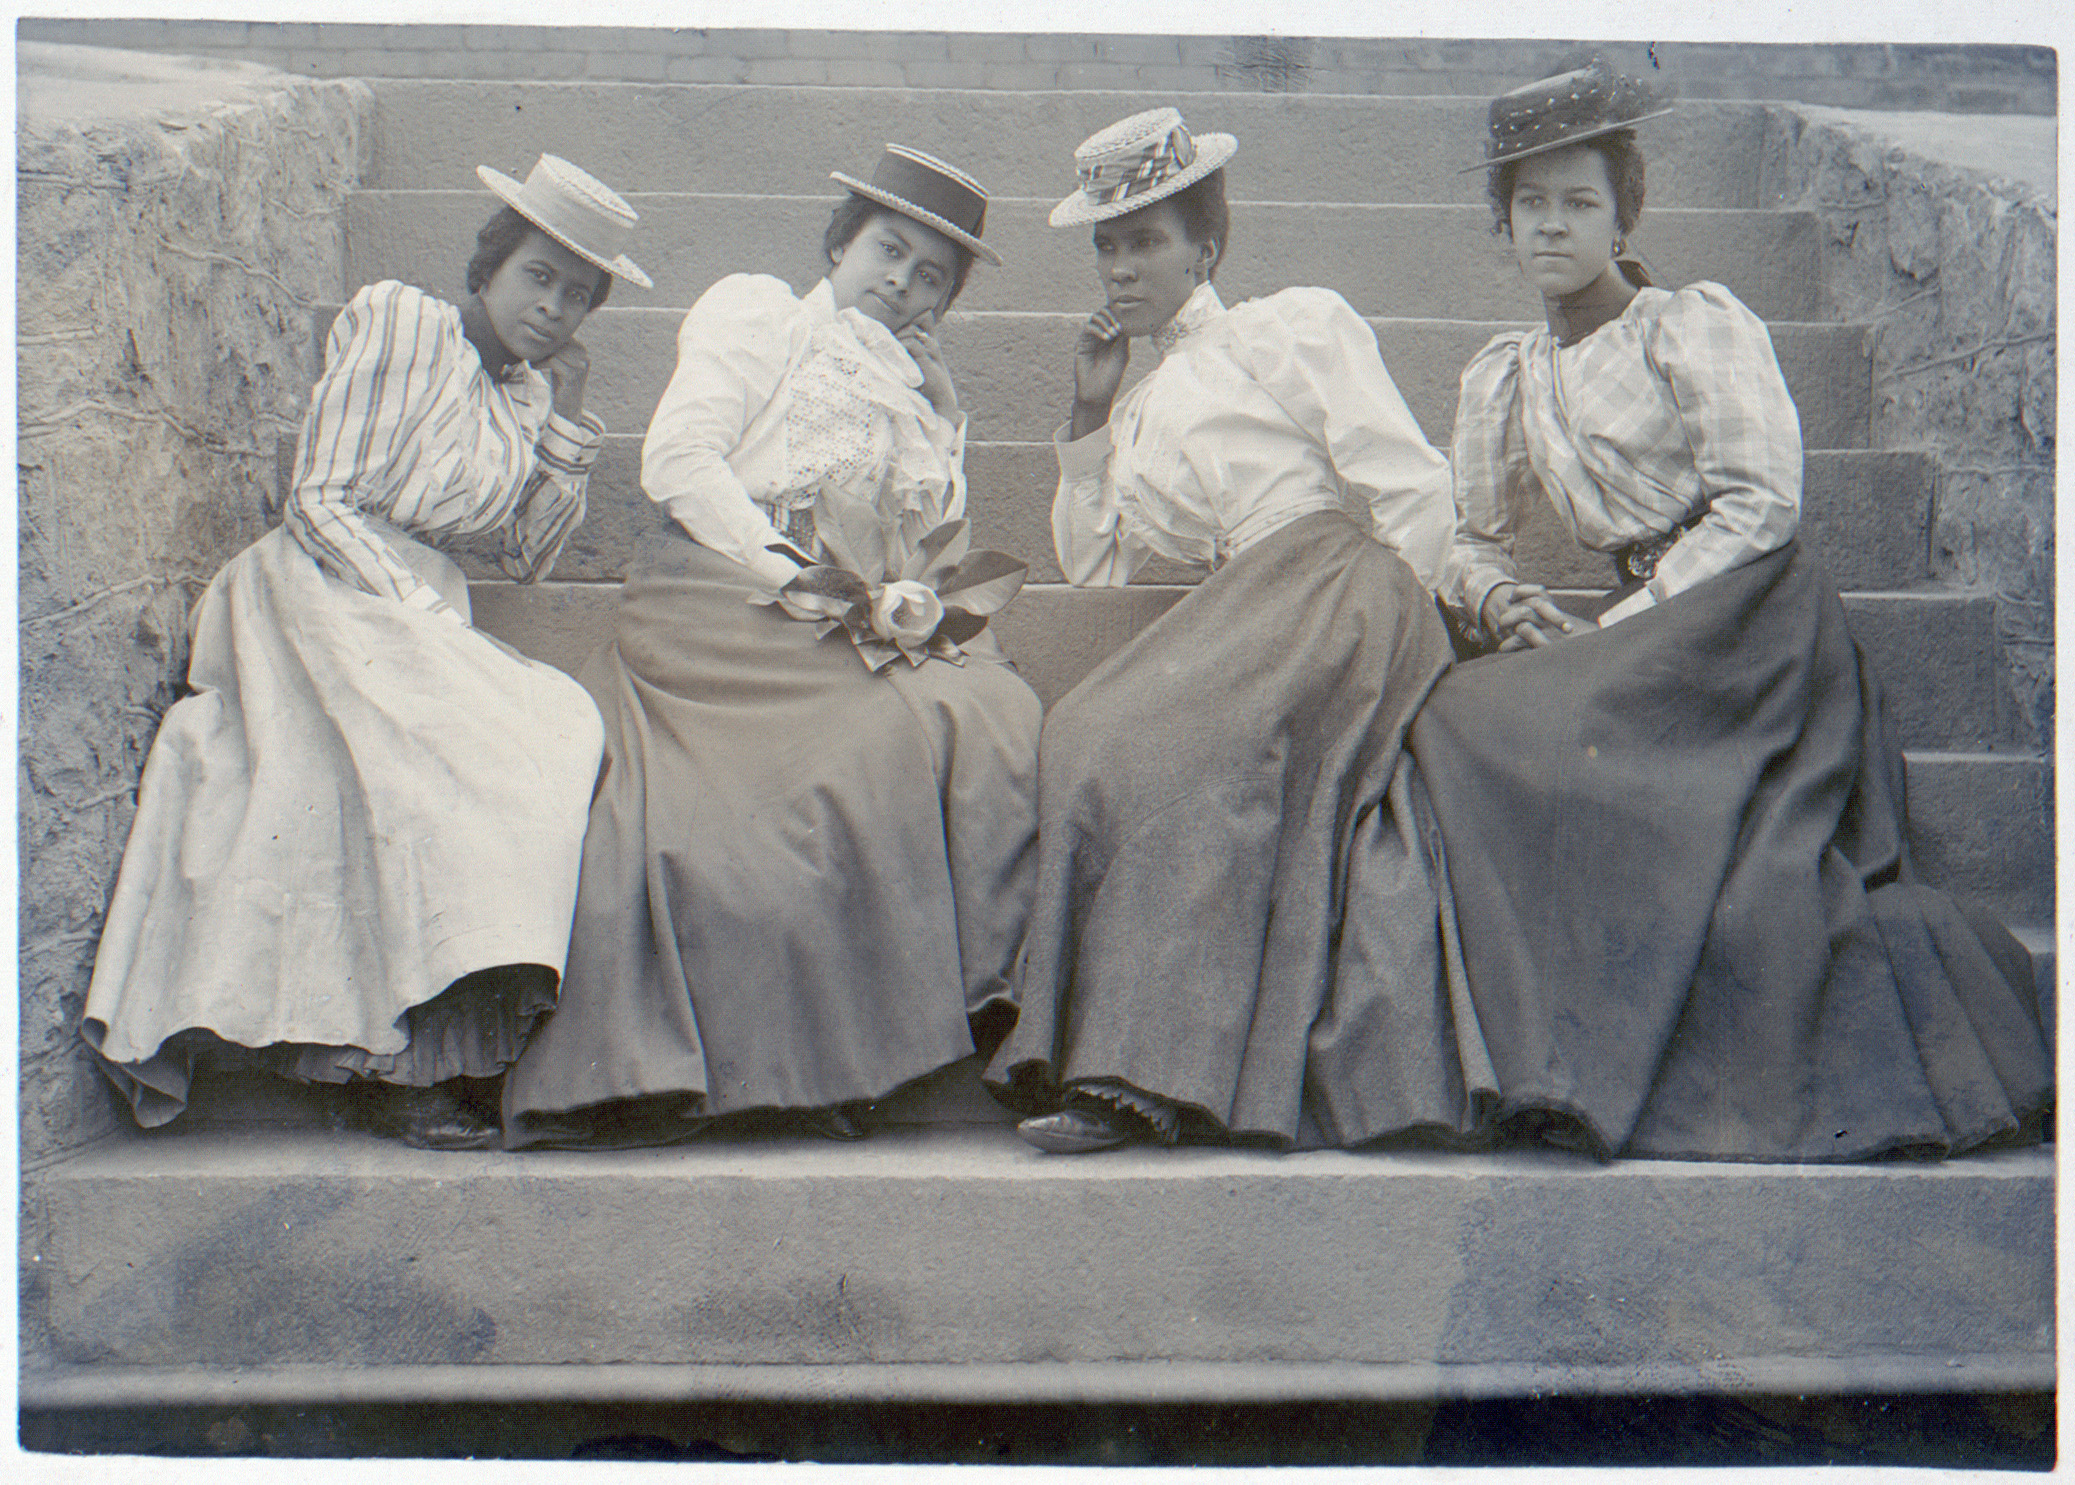 Thomas E. Askew, Four African American women seated on steps of building at Atlanta University, Georgia, 1899 or 1900, matte collodion silver print, photo in album (disbound): Negro life in Georgia, U.S.A., compiled and prepared by W.E.B. Du Bois, v. 4, no. 362 (Library of Congress)